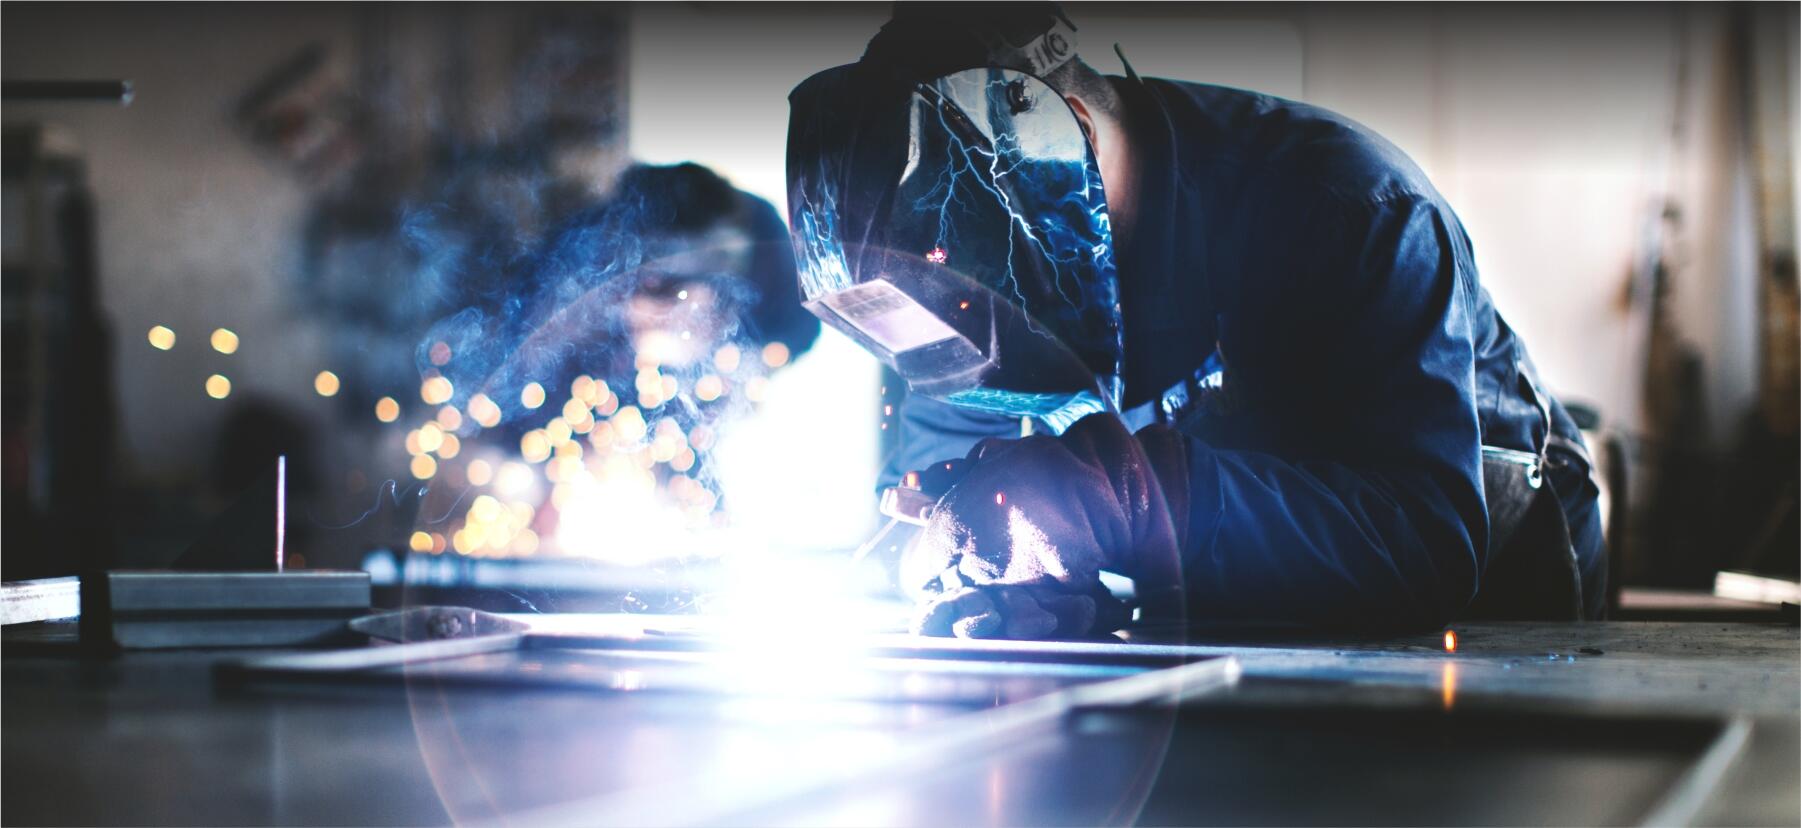 Welding | Career and Technical Education Programs